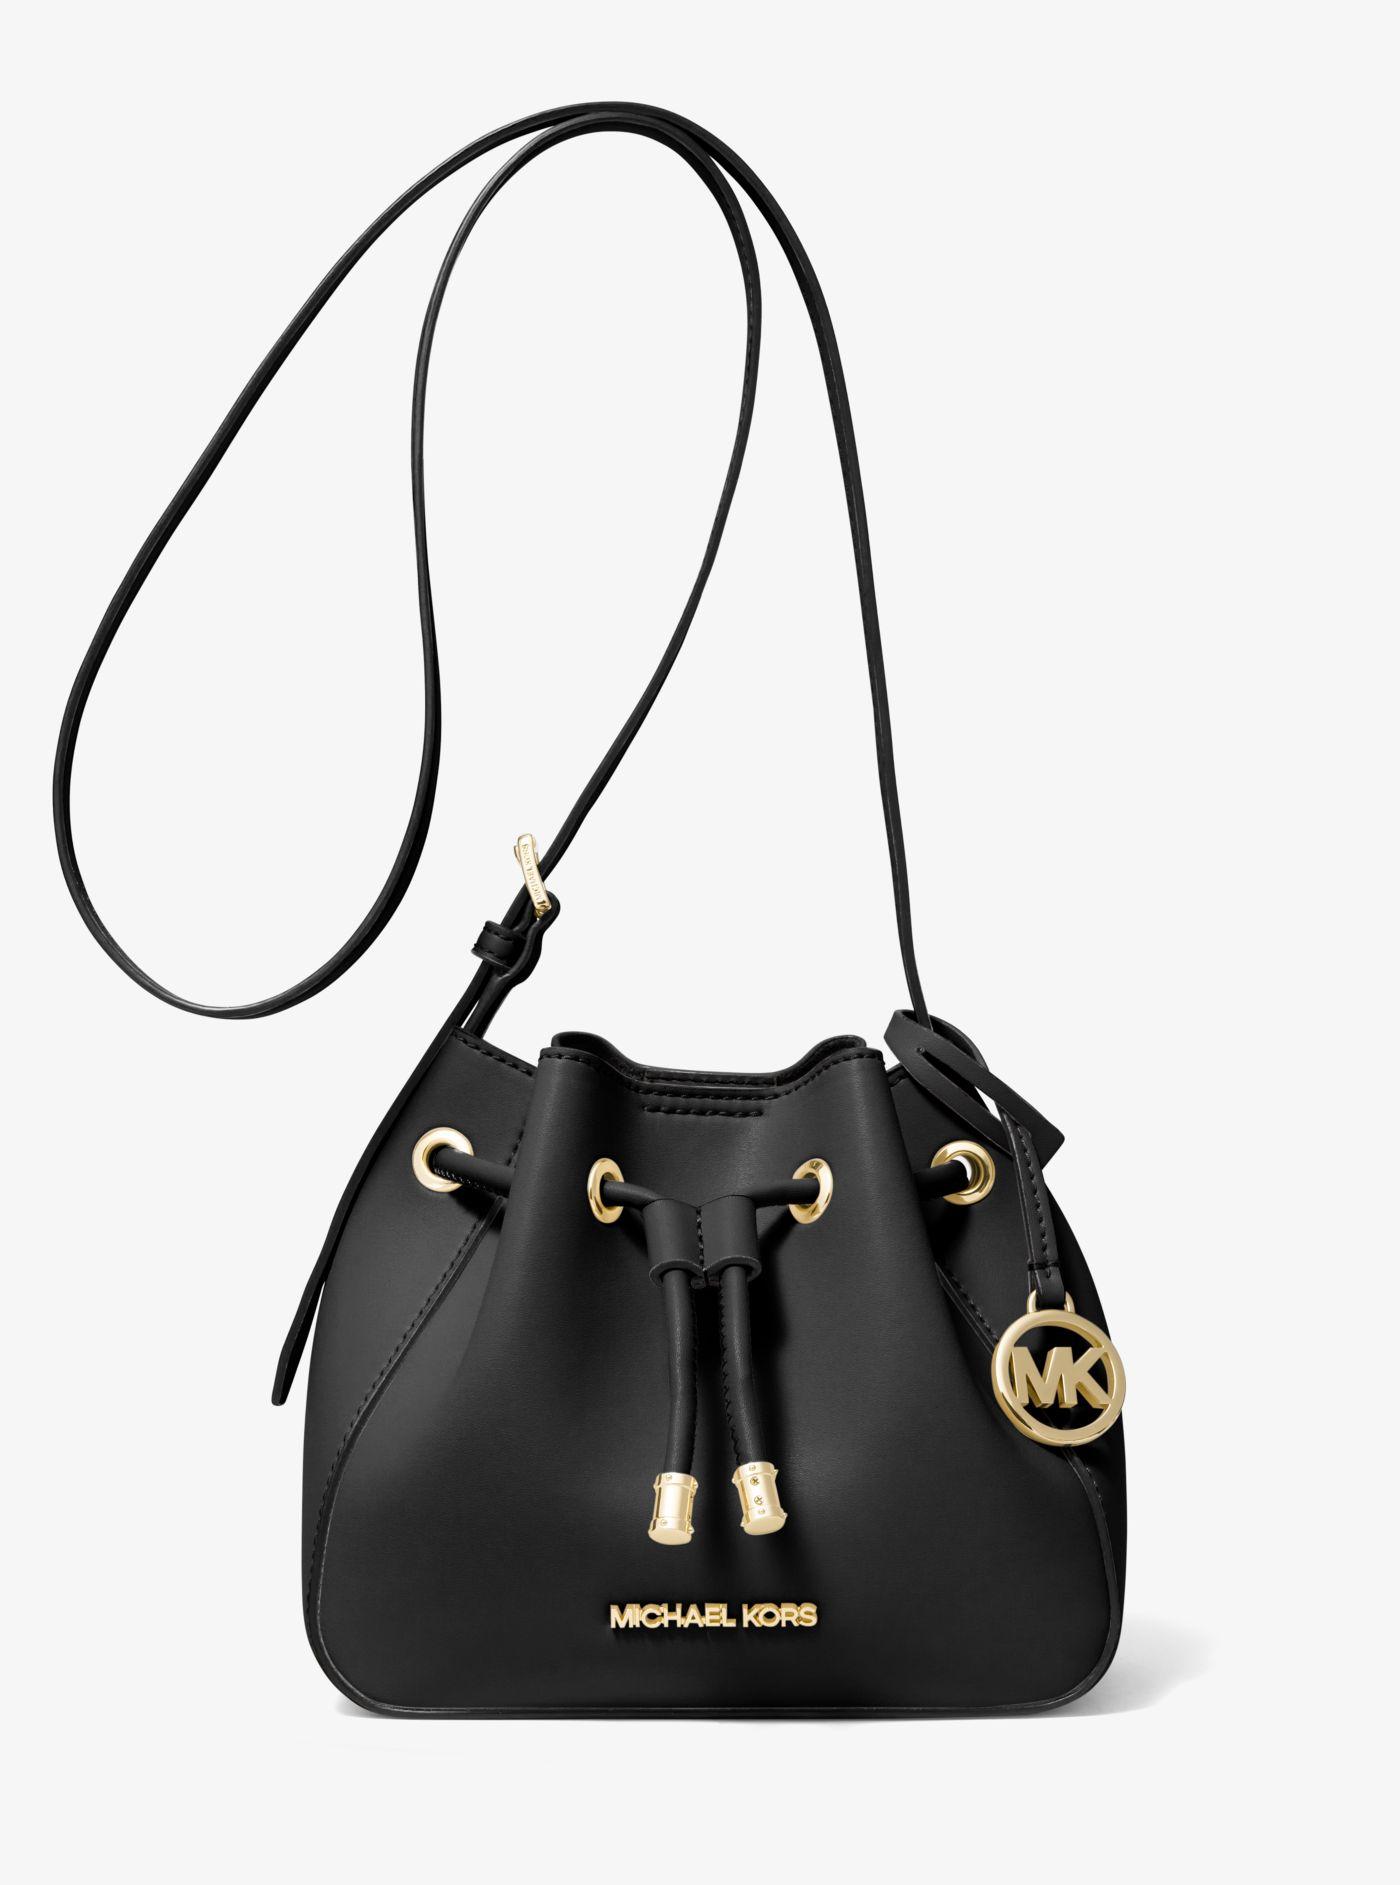 Michael Kors Phoebe Small Faux Leather Bucket Bag in Black | Lyst